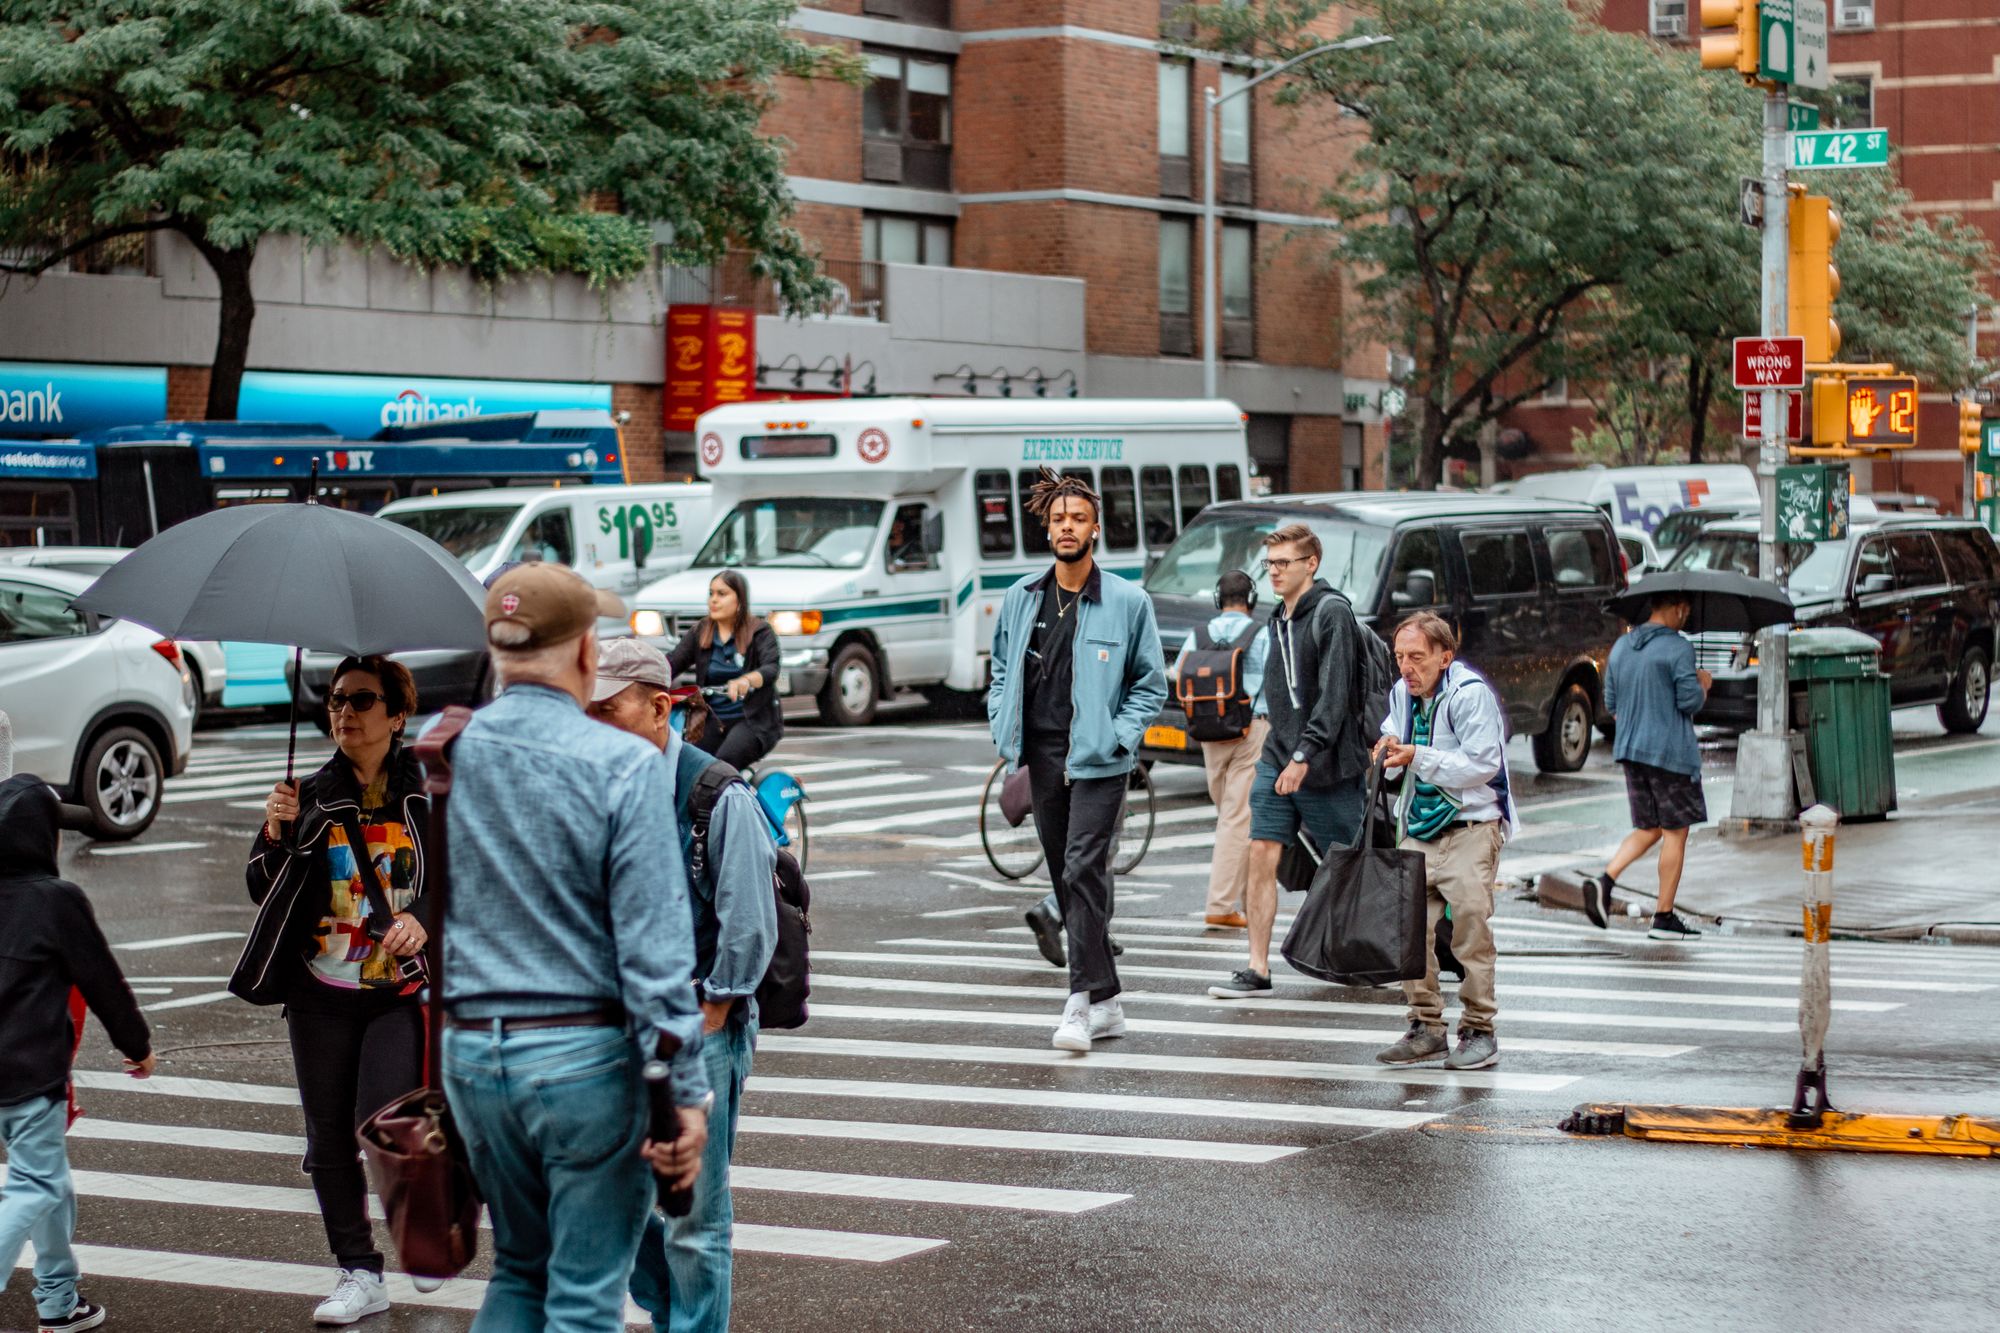 People crossing the street in New York: A photo by David Elikwu